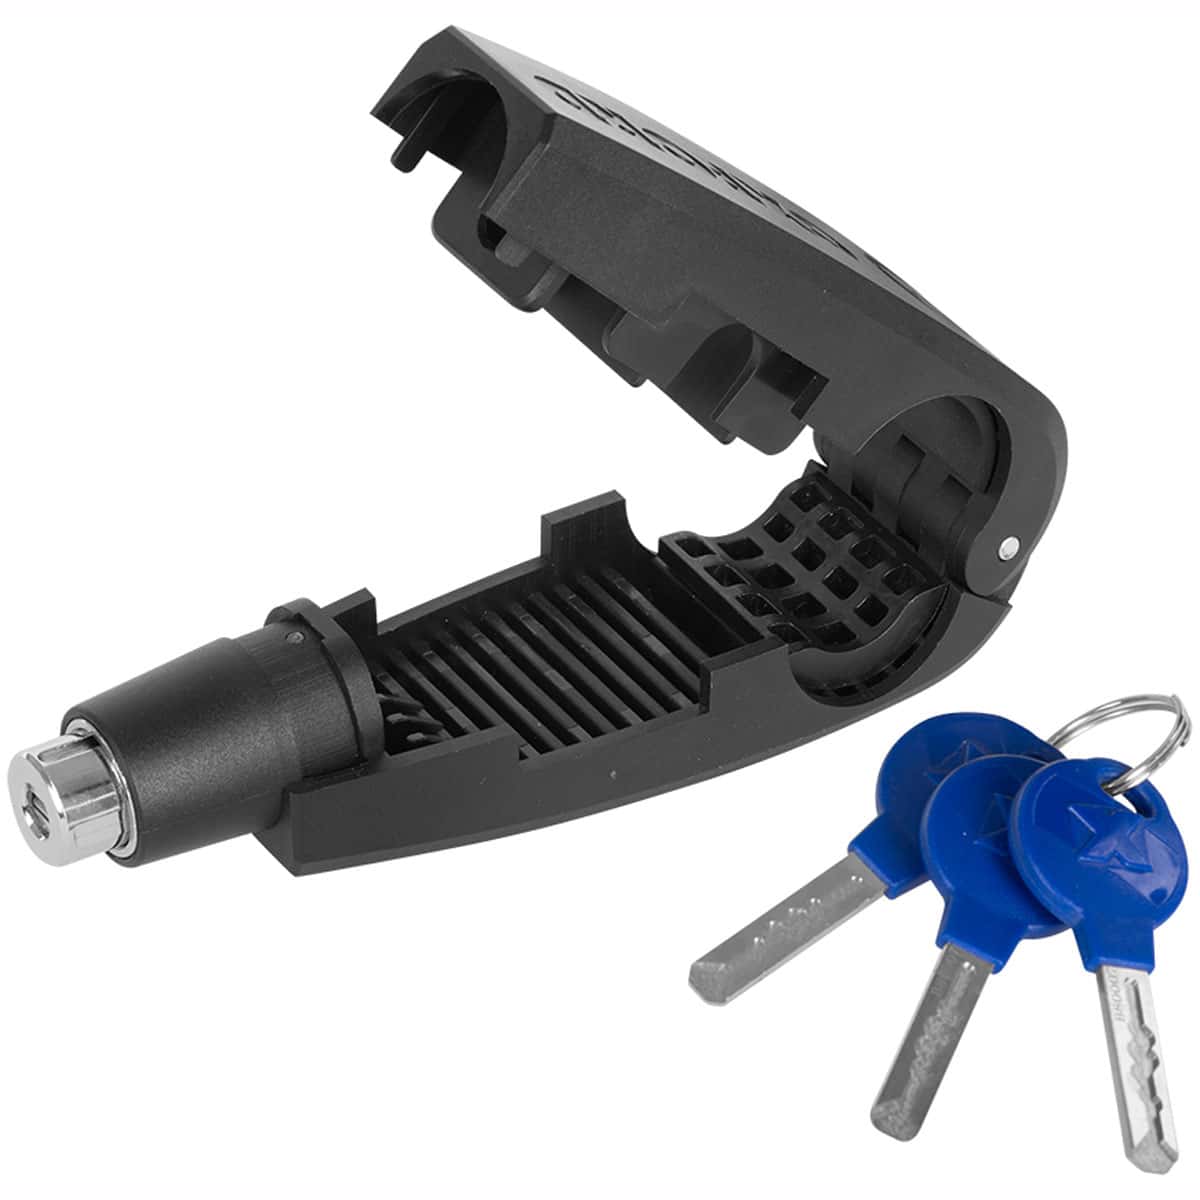 The Oxford LeverLock Motorcycle Throttle and Brake Security Lock is an easy-to-use, highly visible and easy to install theft deterrent for all scooters, motorcycles and ATVs